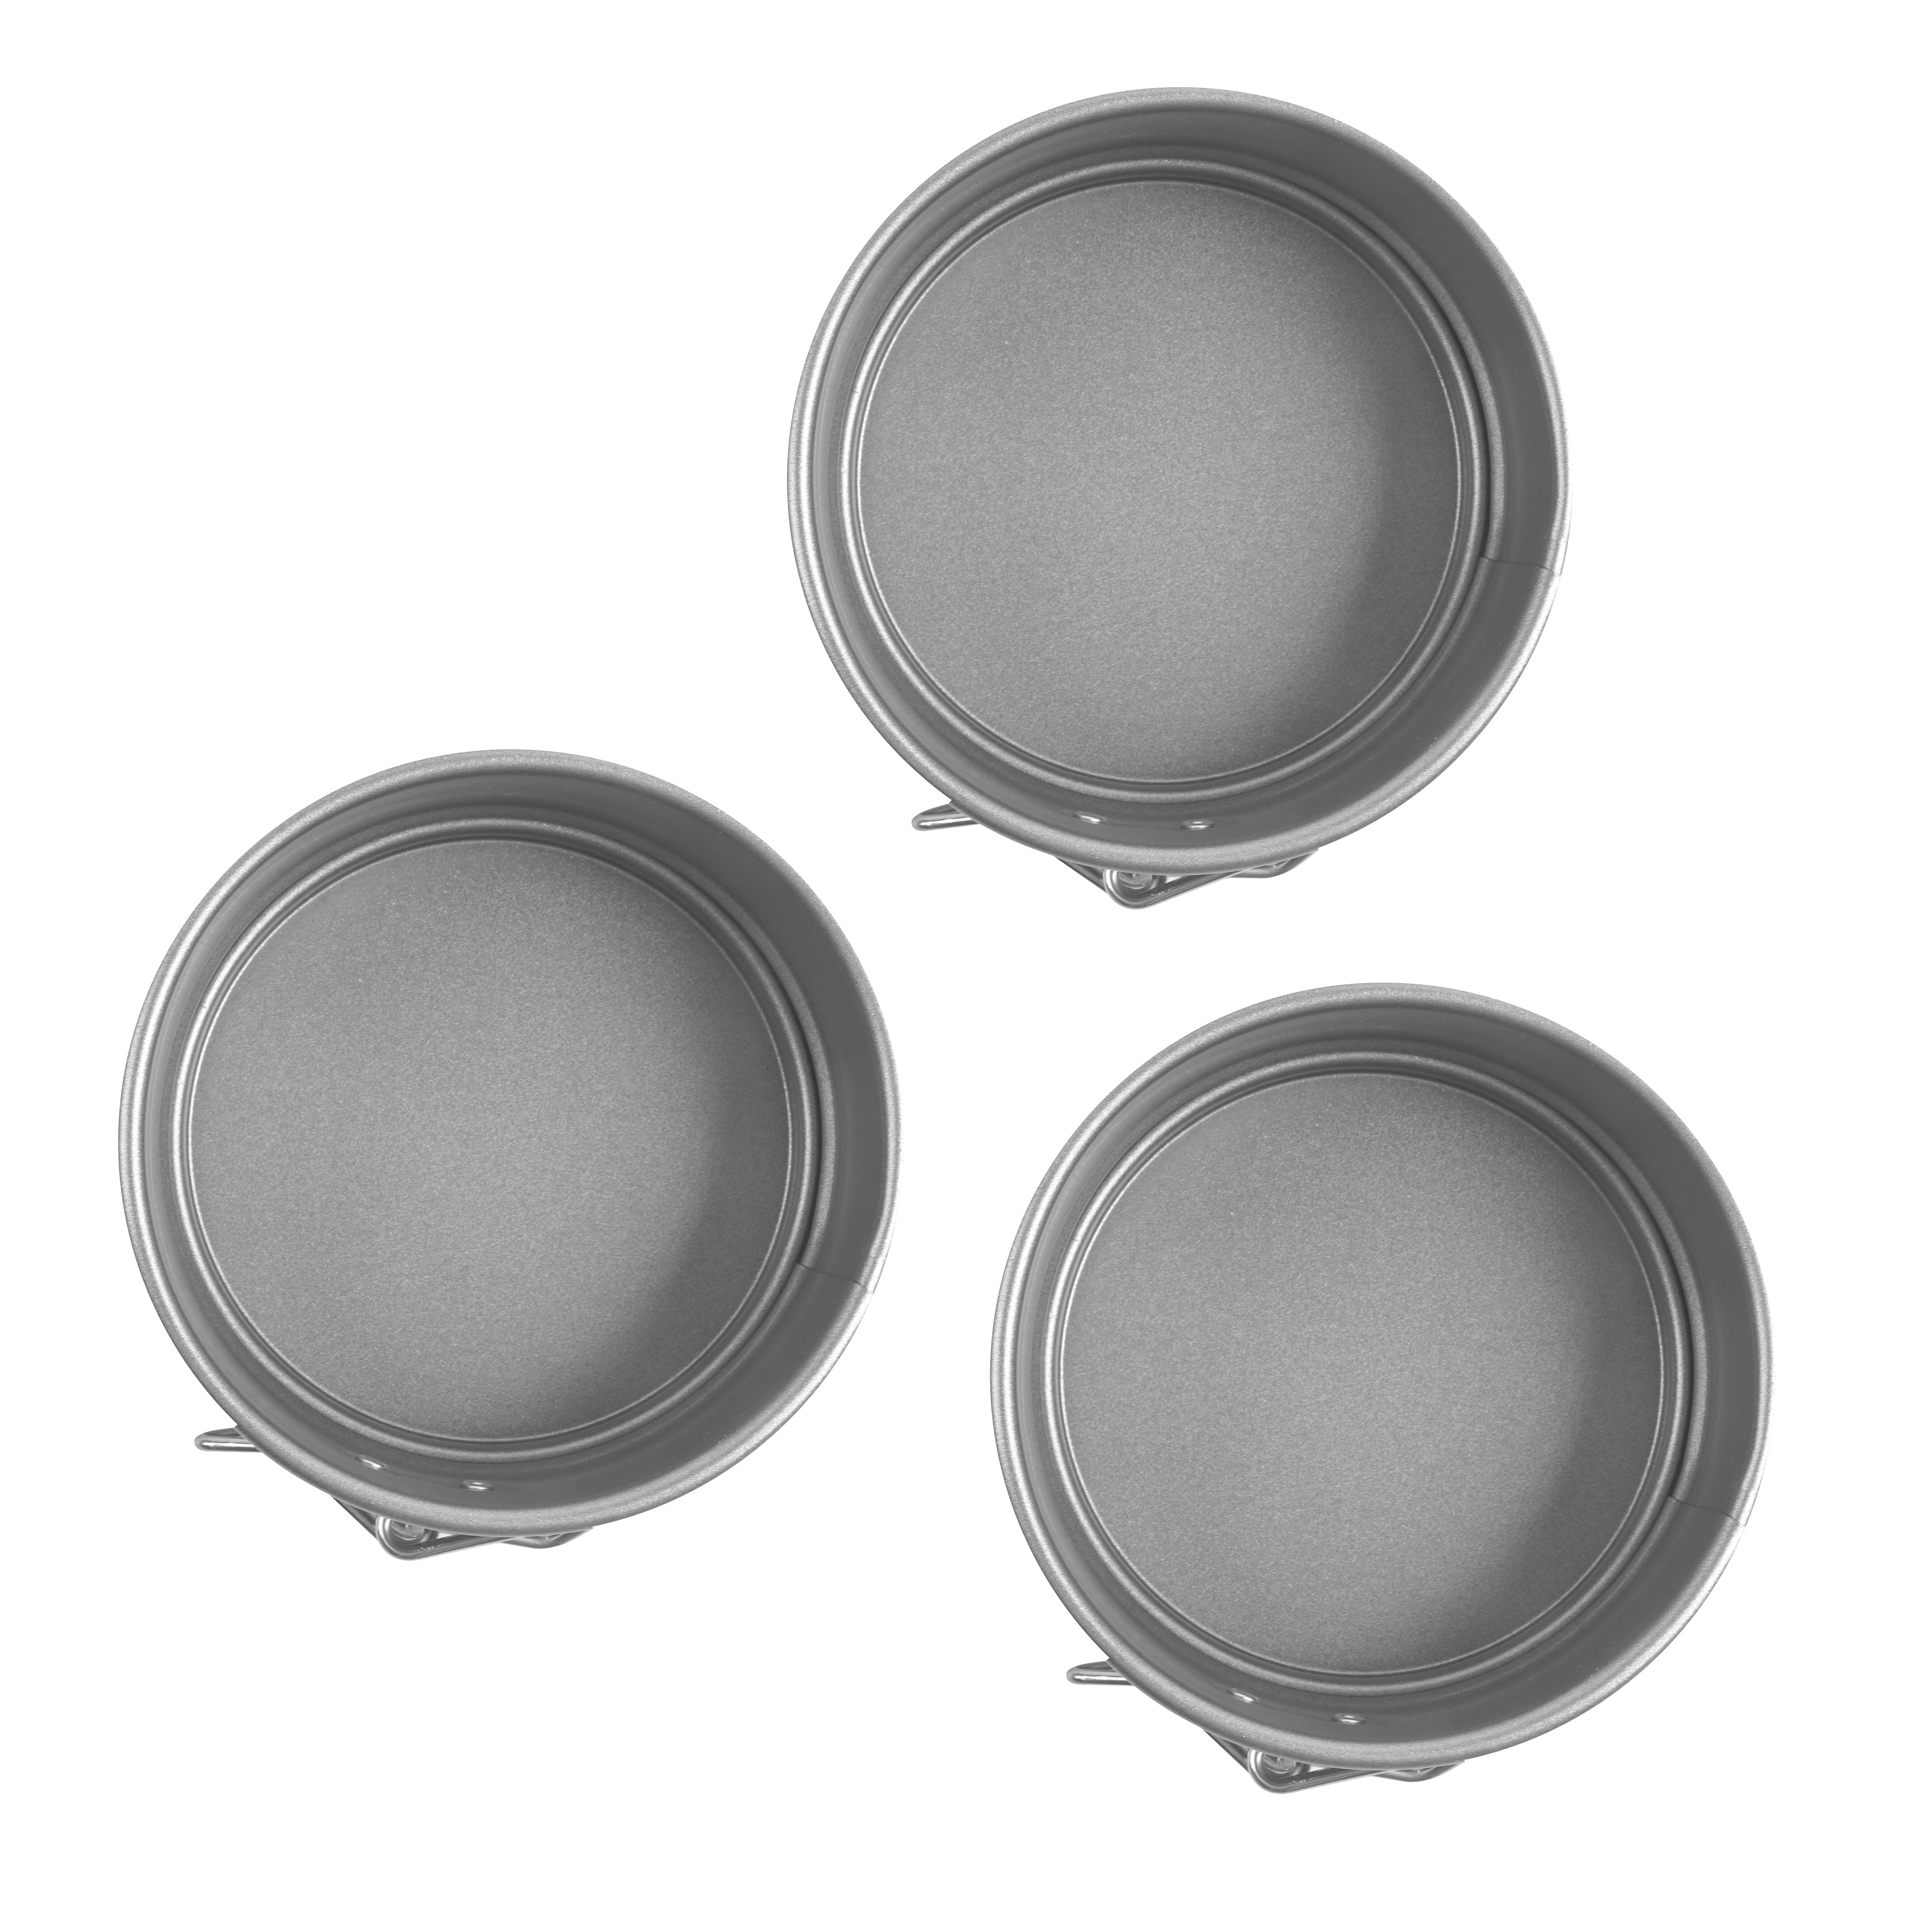 4-Inch Mini Springform Pan Set - 8 Piece Small Nonstick Cheesecake Pan For  Mini Cheesecakes, Pizzas And Quiches - AliExpress